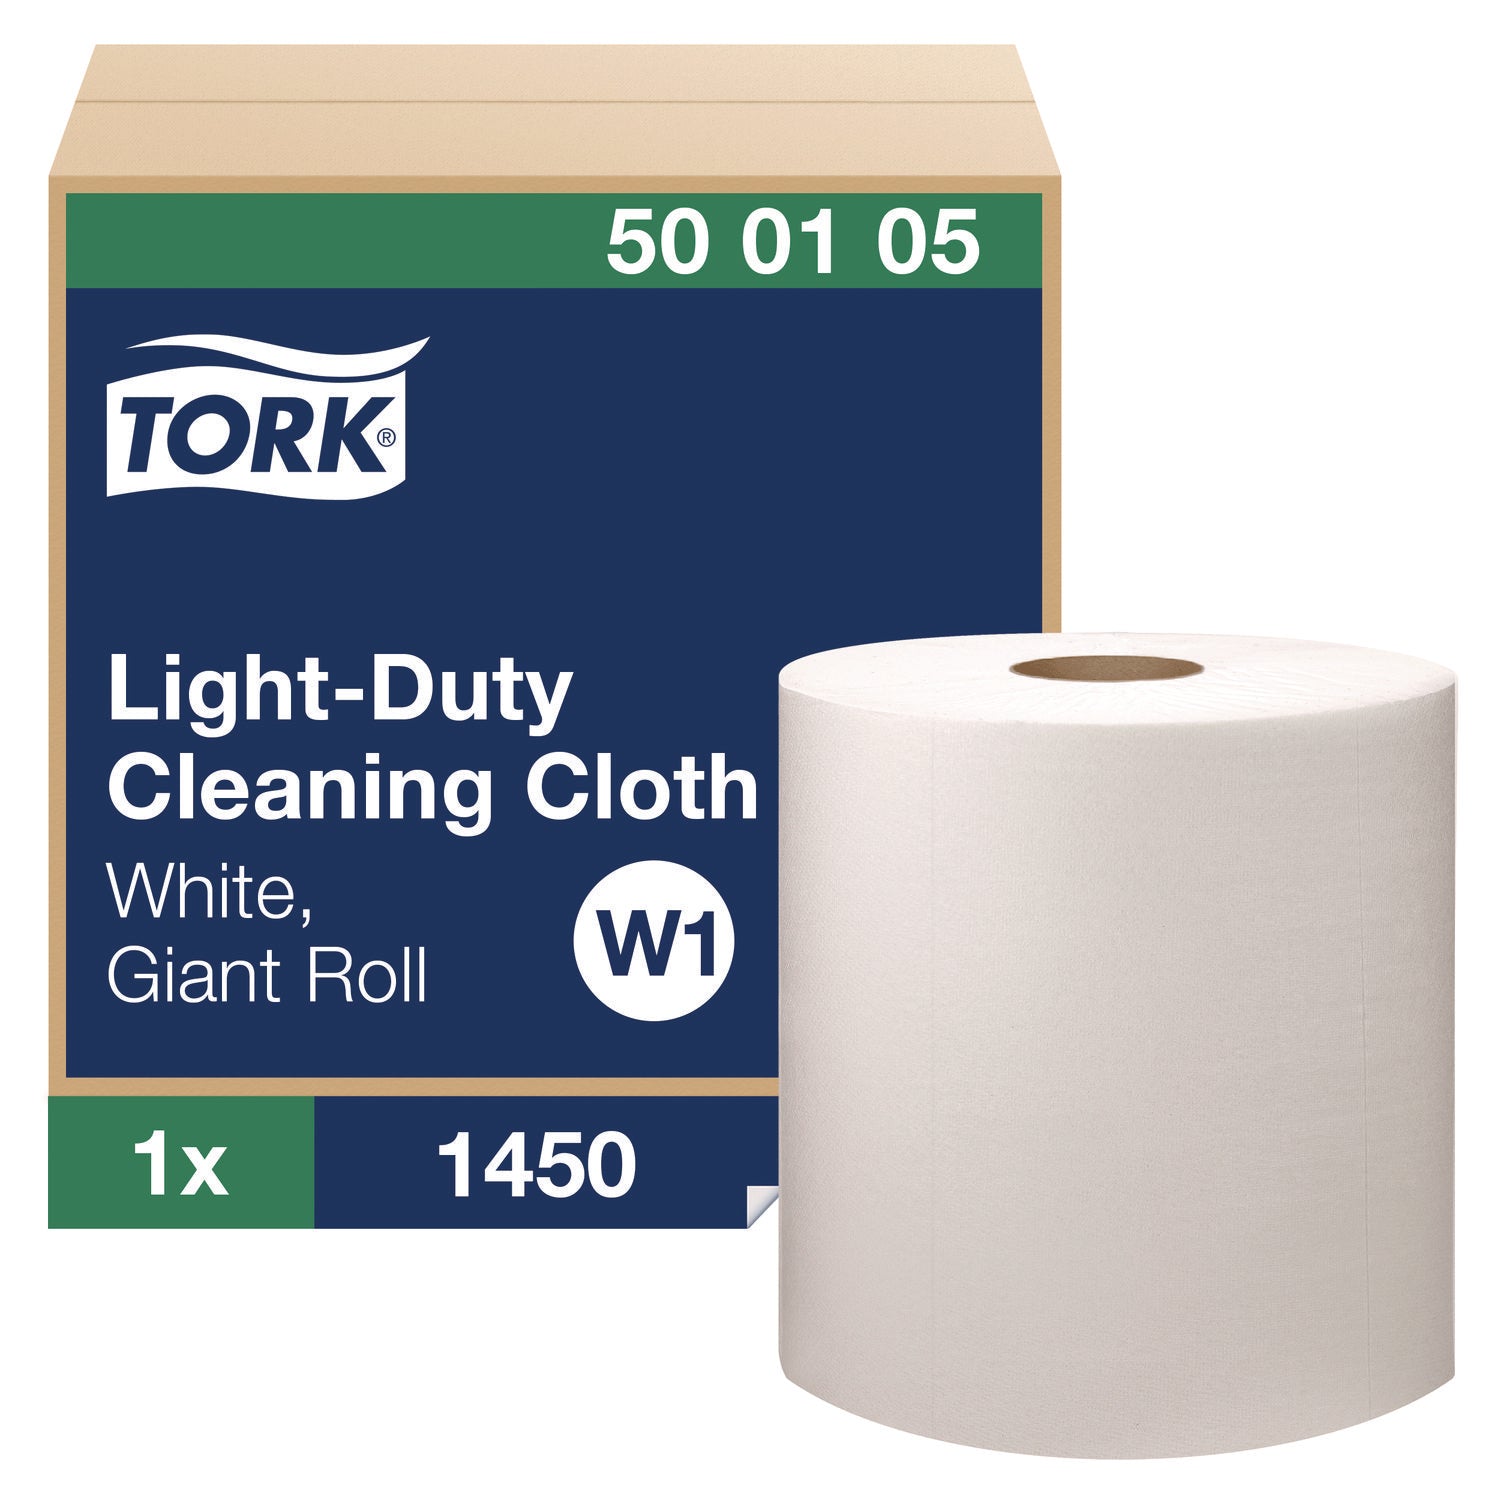 light-duty-cleaning-cloth-giant-roll-1-ply-9-x-124-white-1450-sheet-roll-carton_trk500105 - 1